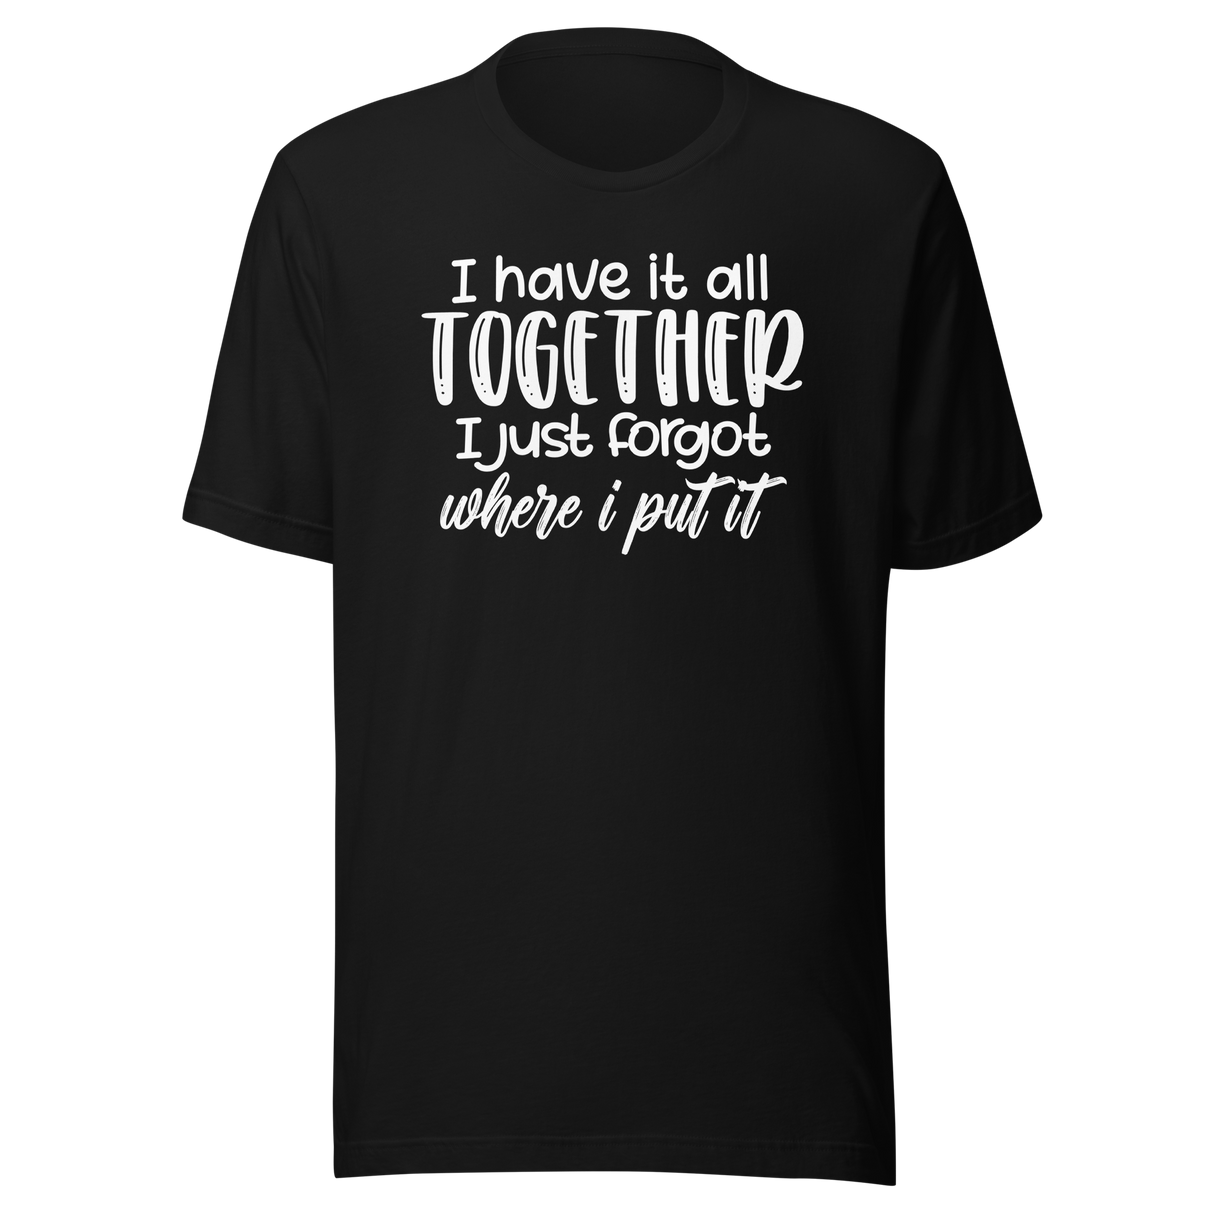 i-have-it-all-together-i-just-forgot-where-i-put-it-life-tee-funny-t-shirt-relatable-tee-organized-t-shirt-forgetful-tee#color_black